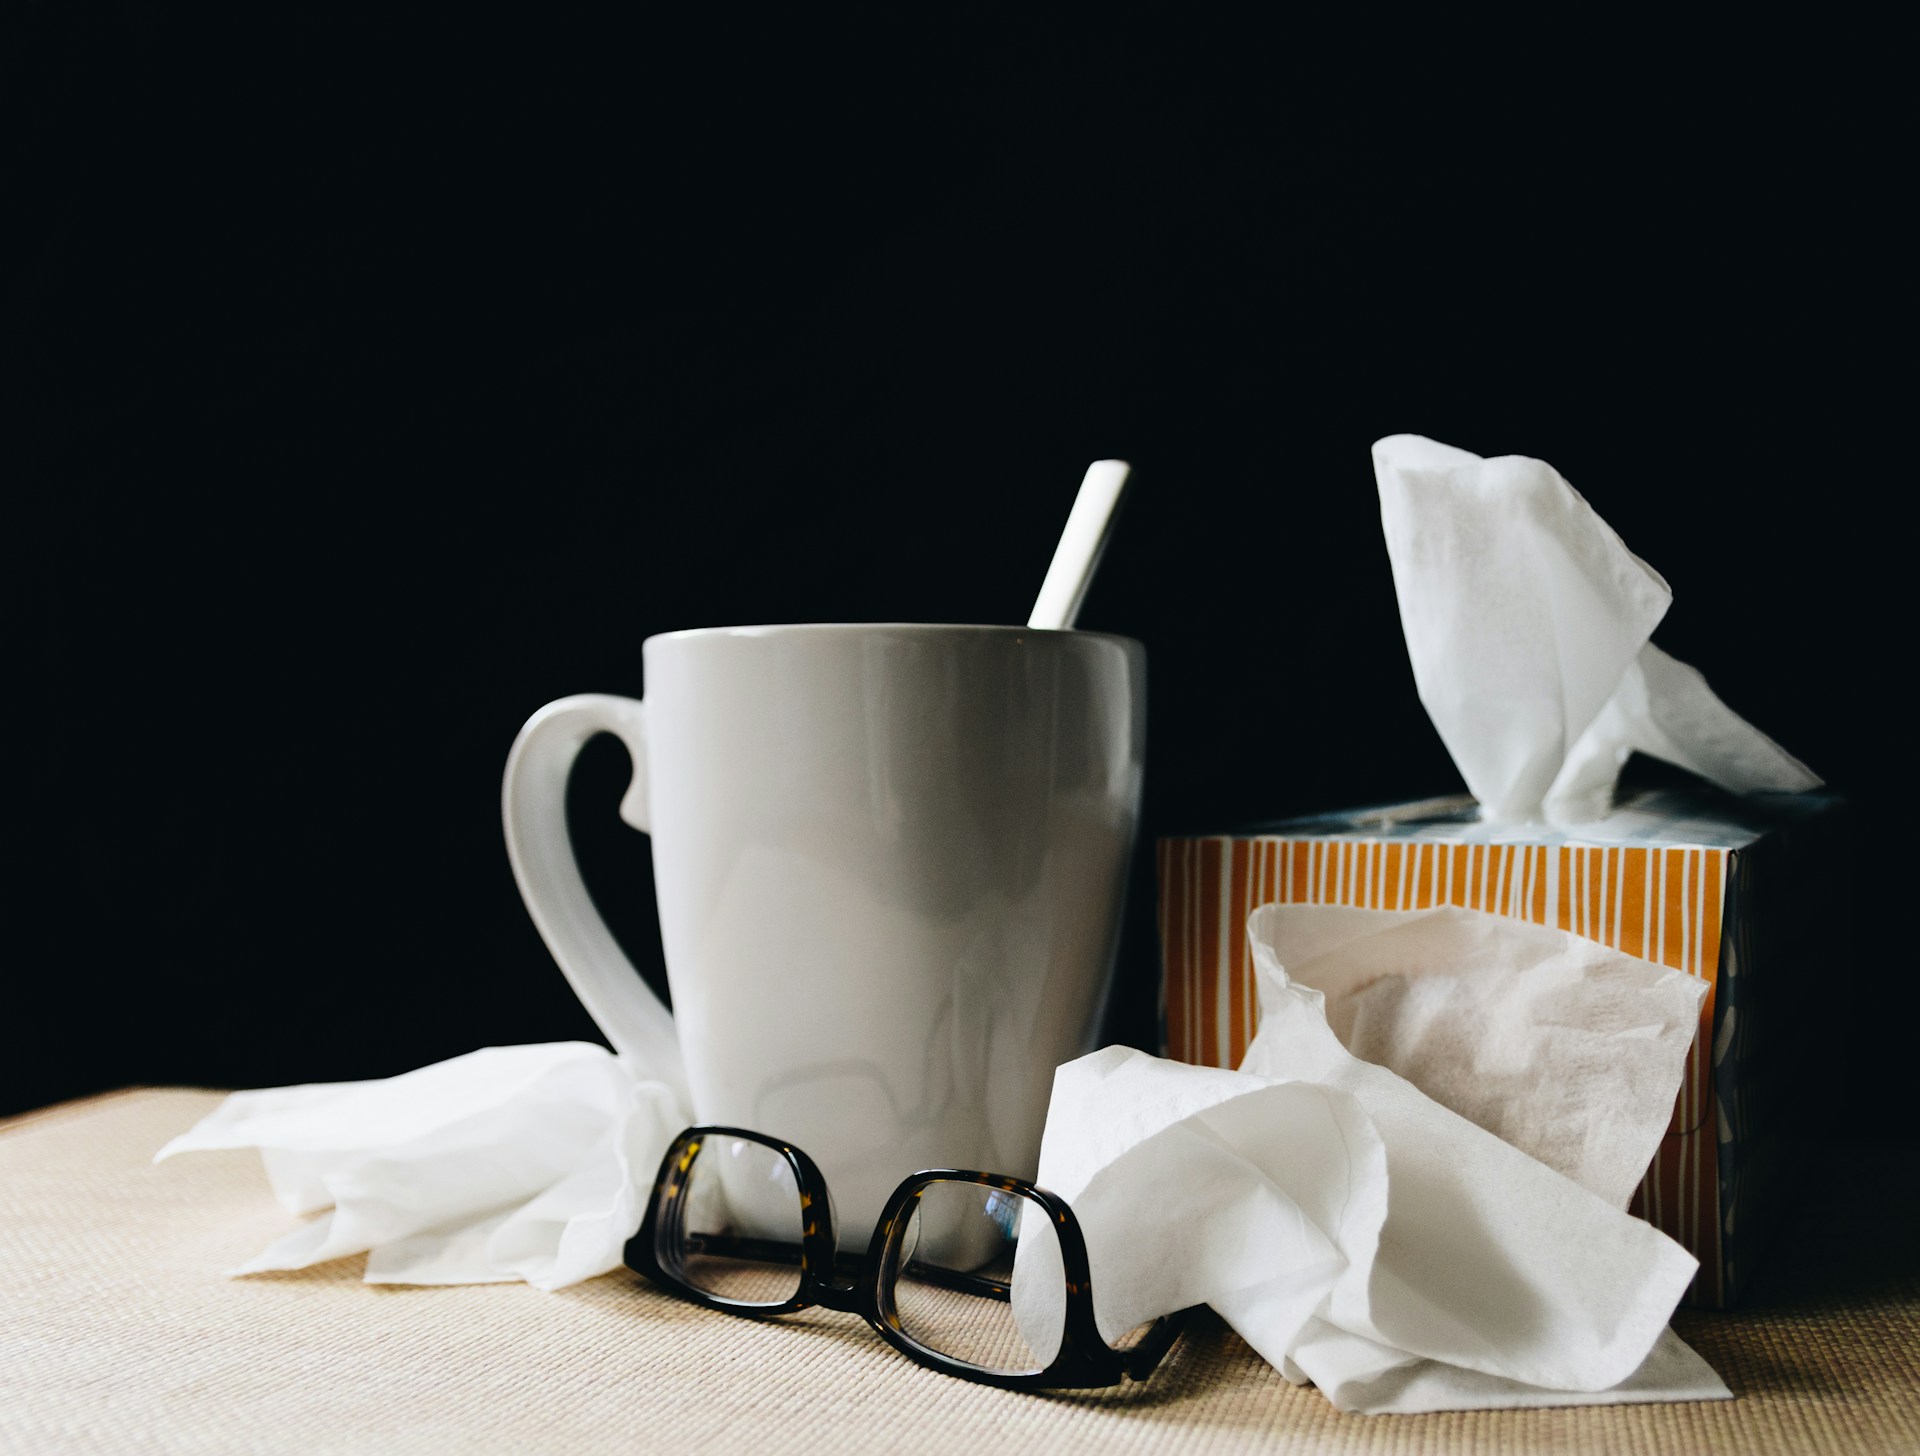 mug of tea, box of tissues, and reading glasses gathered on table